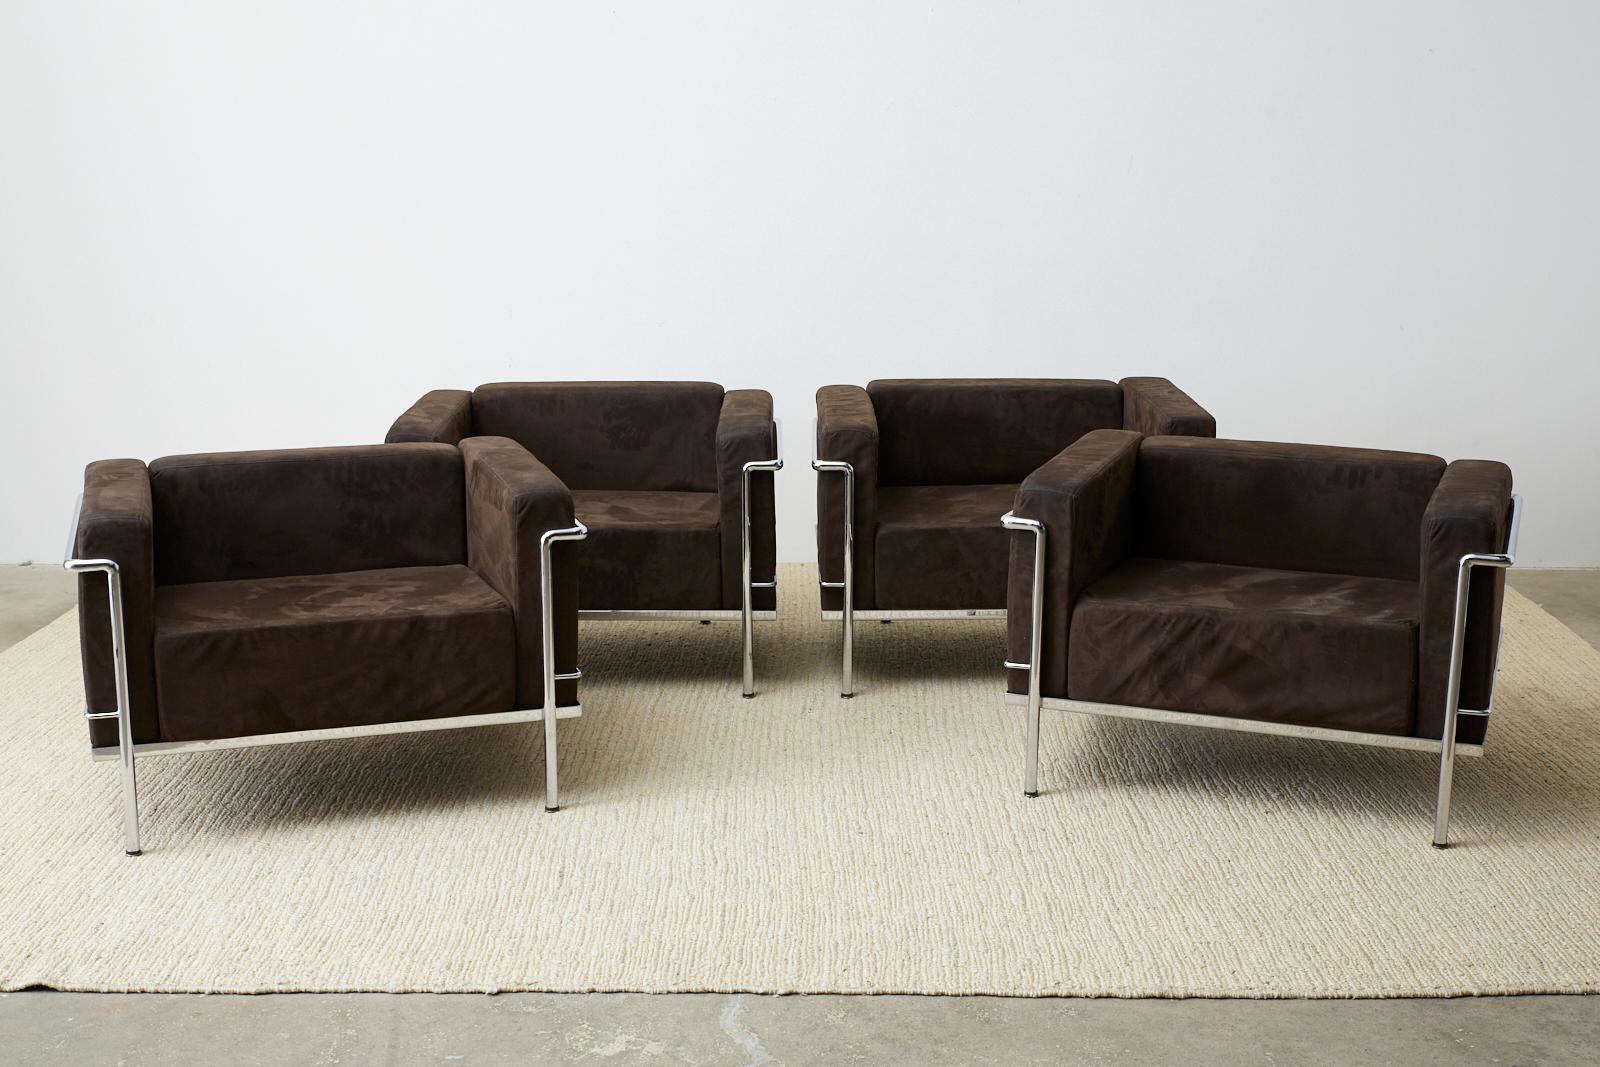 Plush set of four faux leather ultra suede Le Corbusier LC3 style lounge or club chairs made for Mobelaris London, England. Constructed from thick chrome frames with a lustrous finish cradling espresso colored ultra suede cushions. Iconic design and